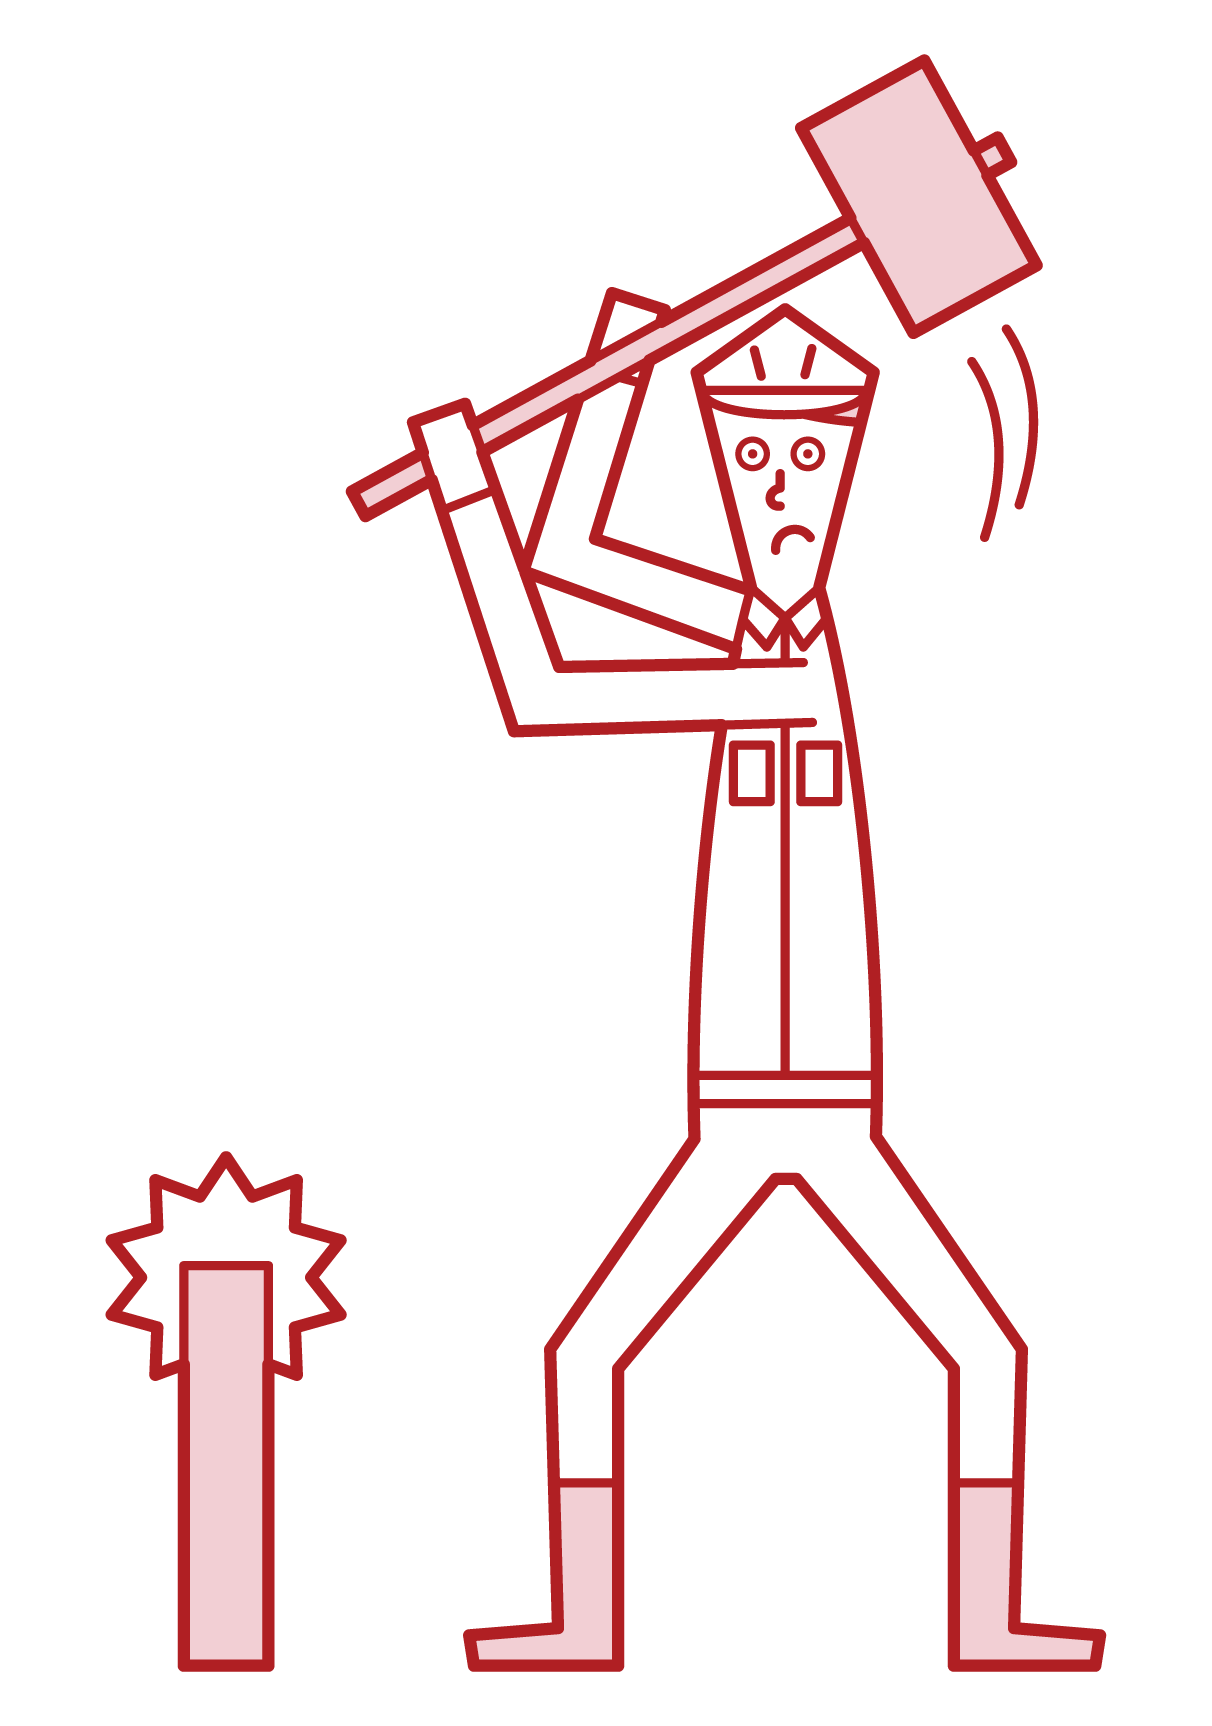 Illustration of a man hitting a stake